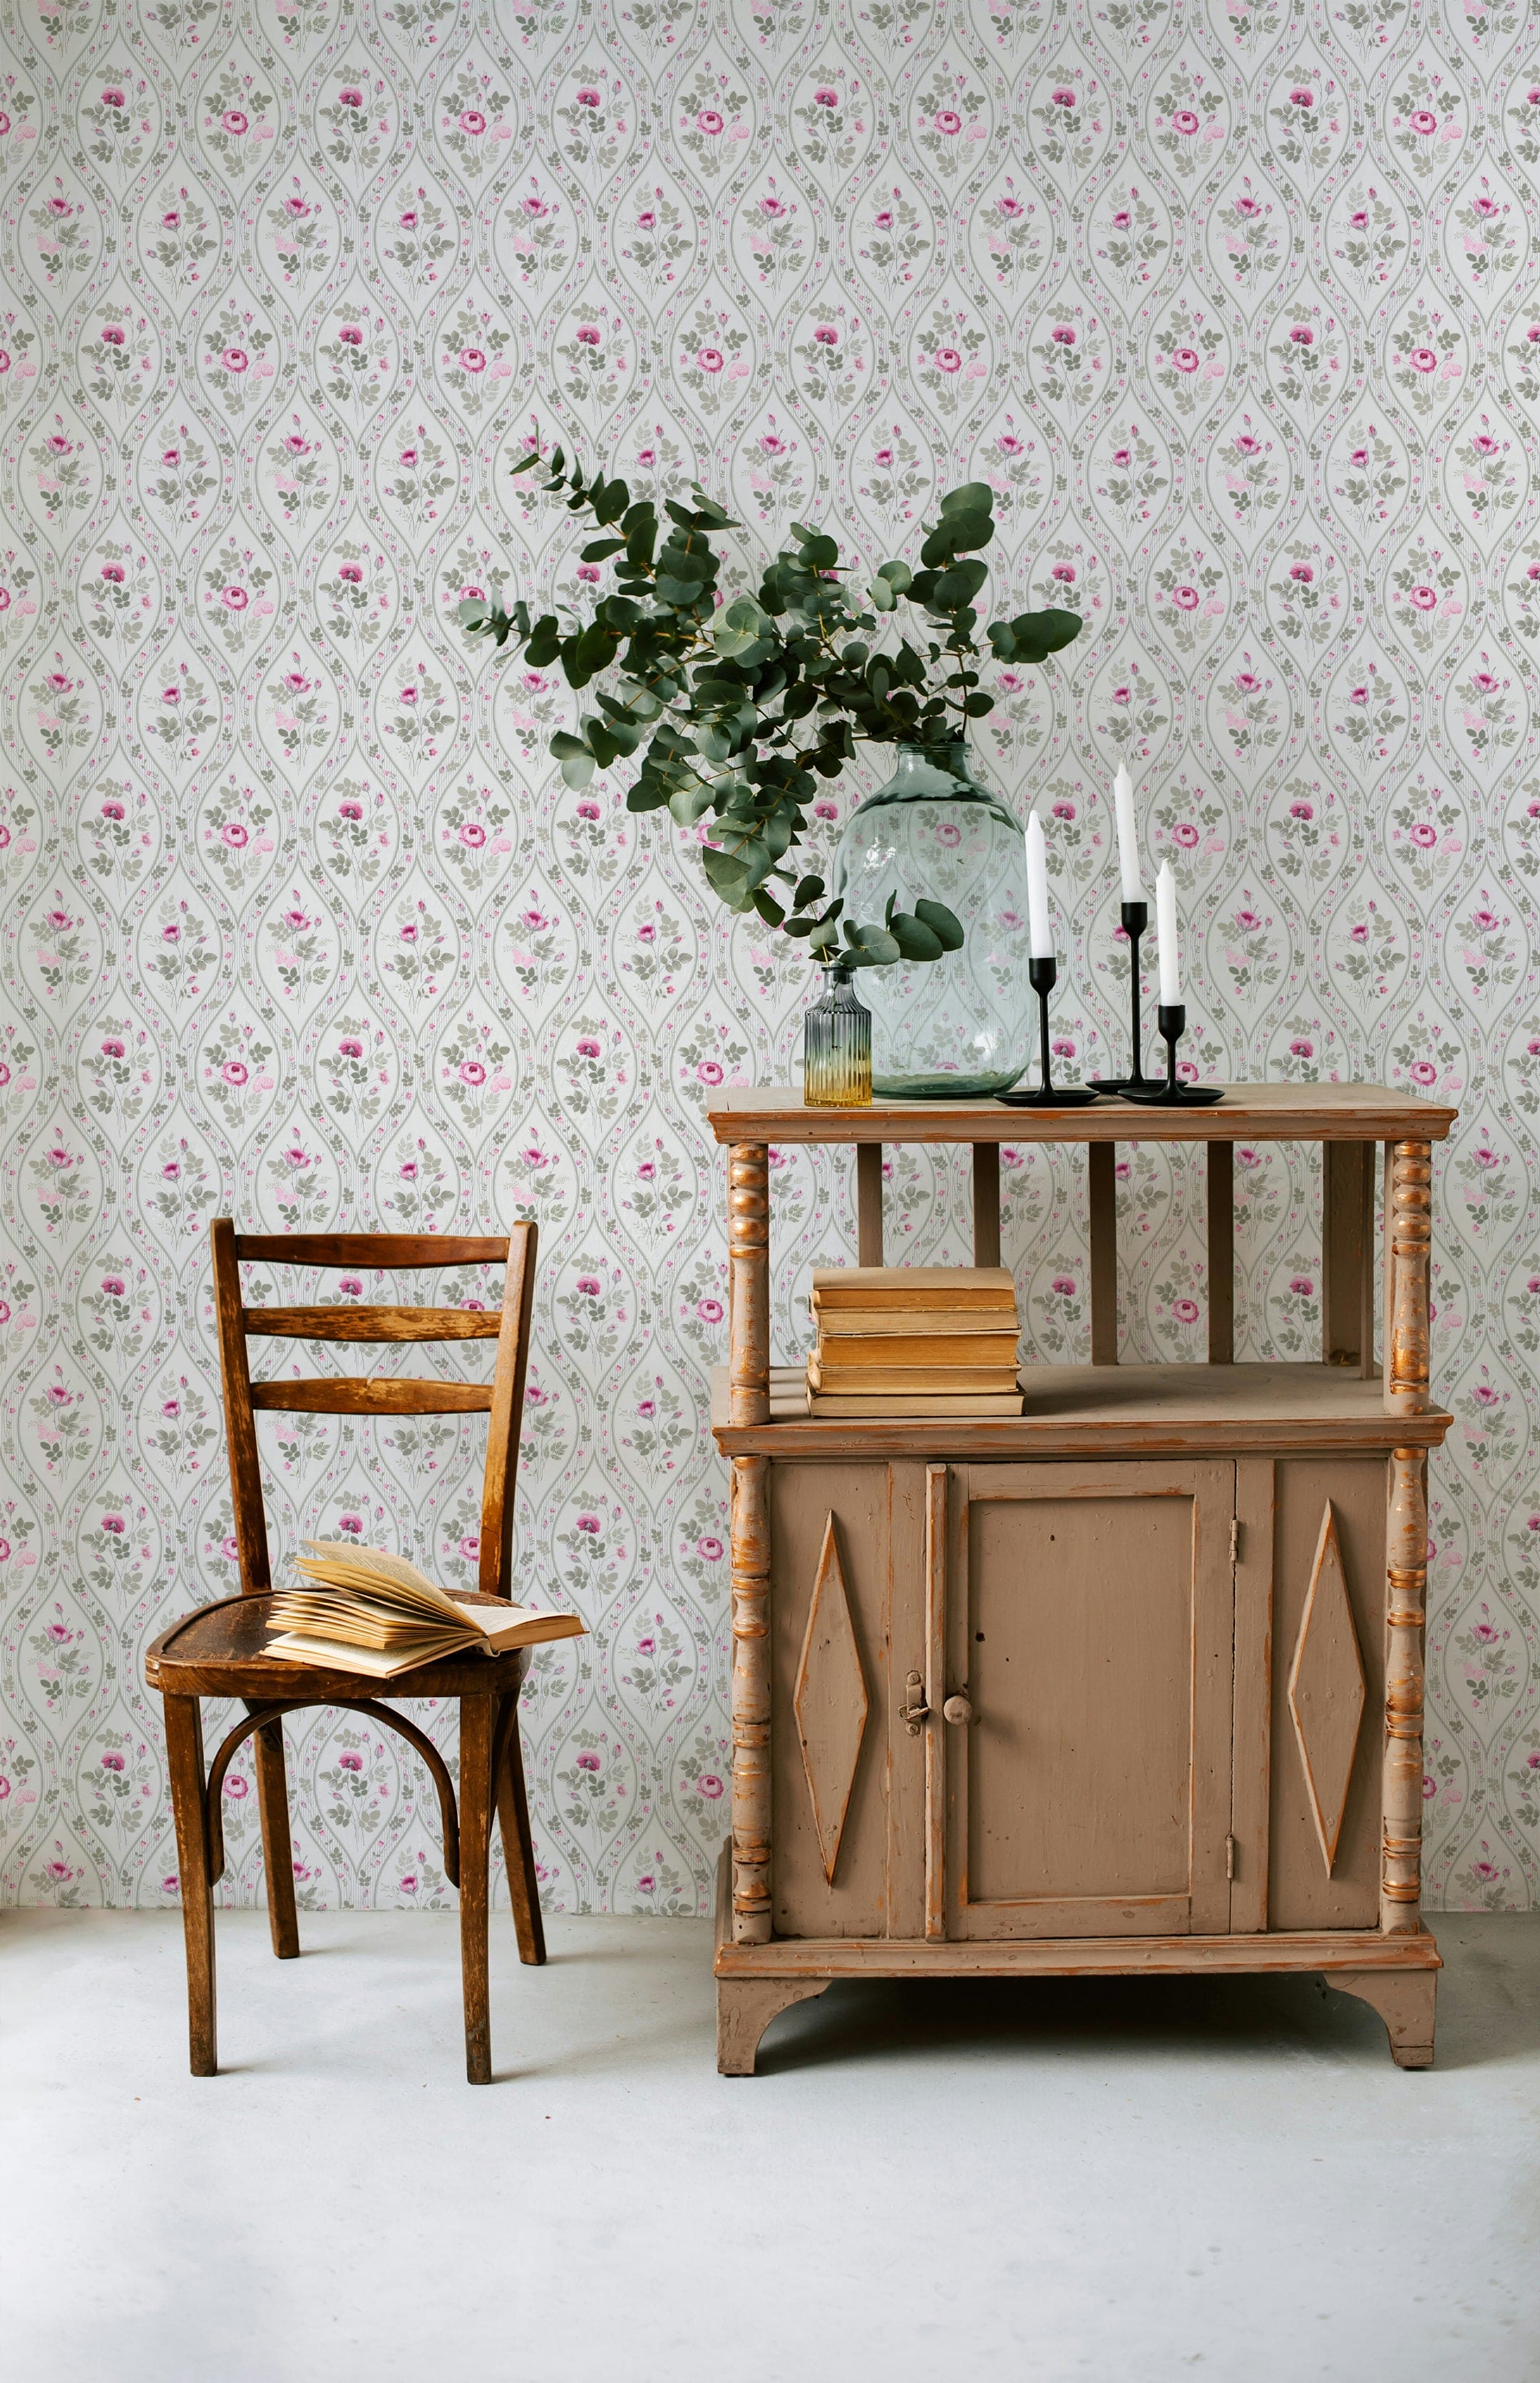 A traditional interior setting showcasing the Vintage Charm Wallpaper, where subtle gray teardrops form a classic backdrop to pink roses and green foliage. The vintage furniture and rustic décor enhance the timeless appeal of the wallpaper, creating a cozy and nostalgic space.